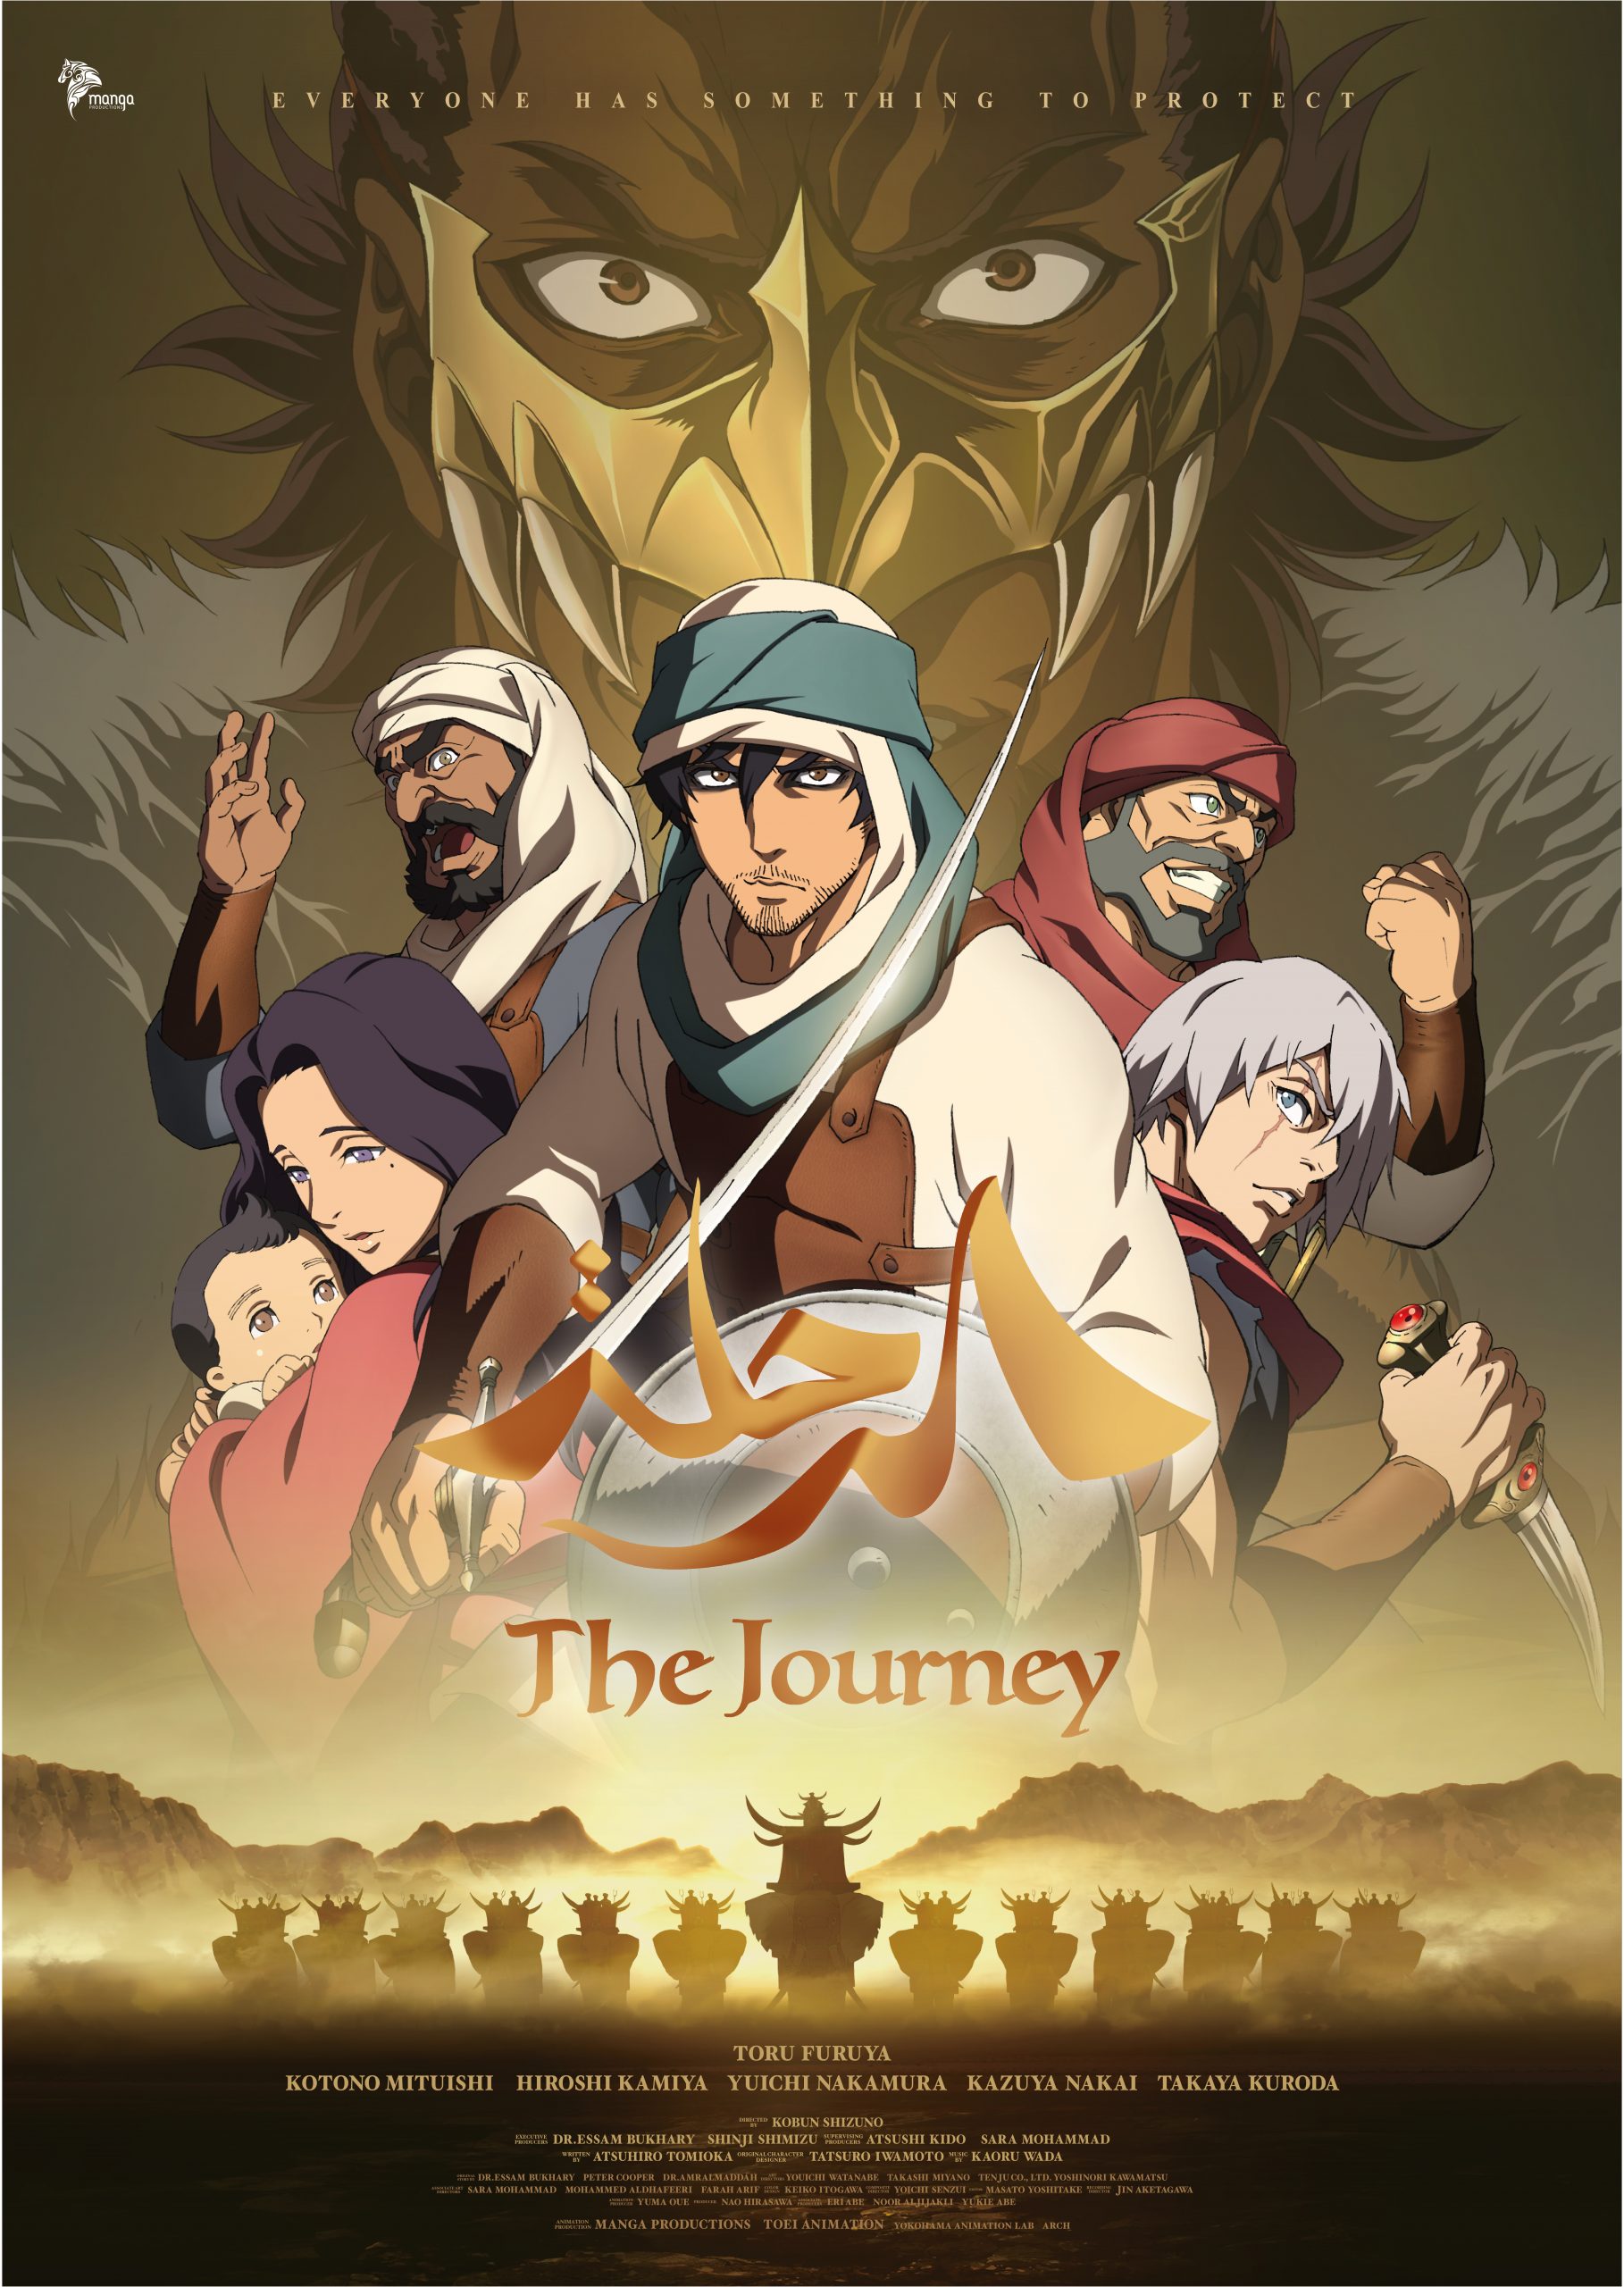 Saudi Japanese anime “The Journey” Trailer released Concurrently with  Berlinale – Manga Productions